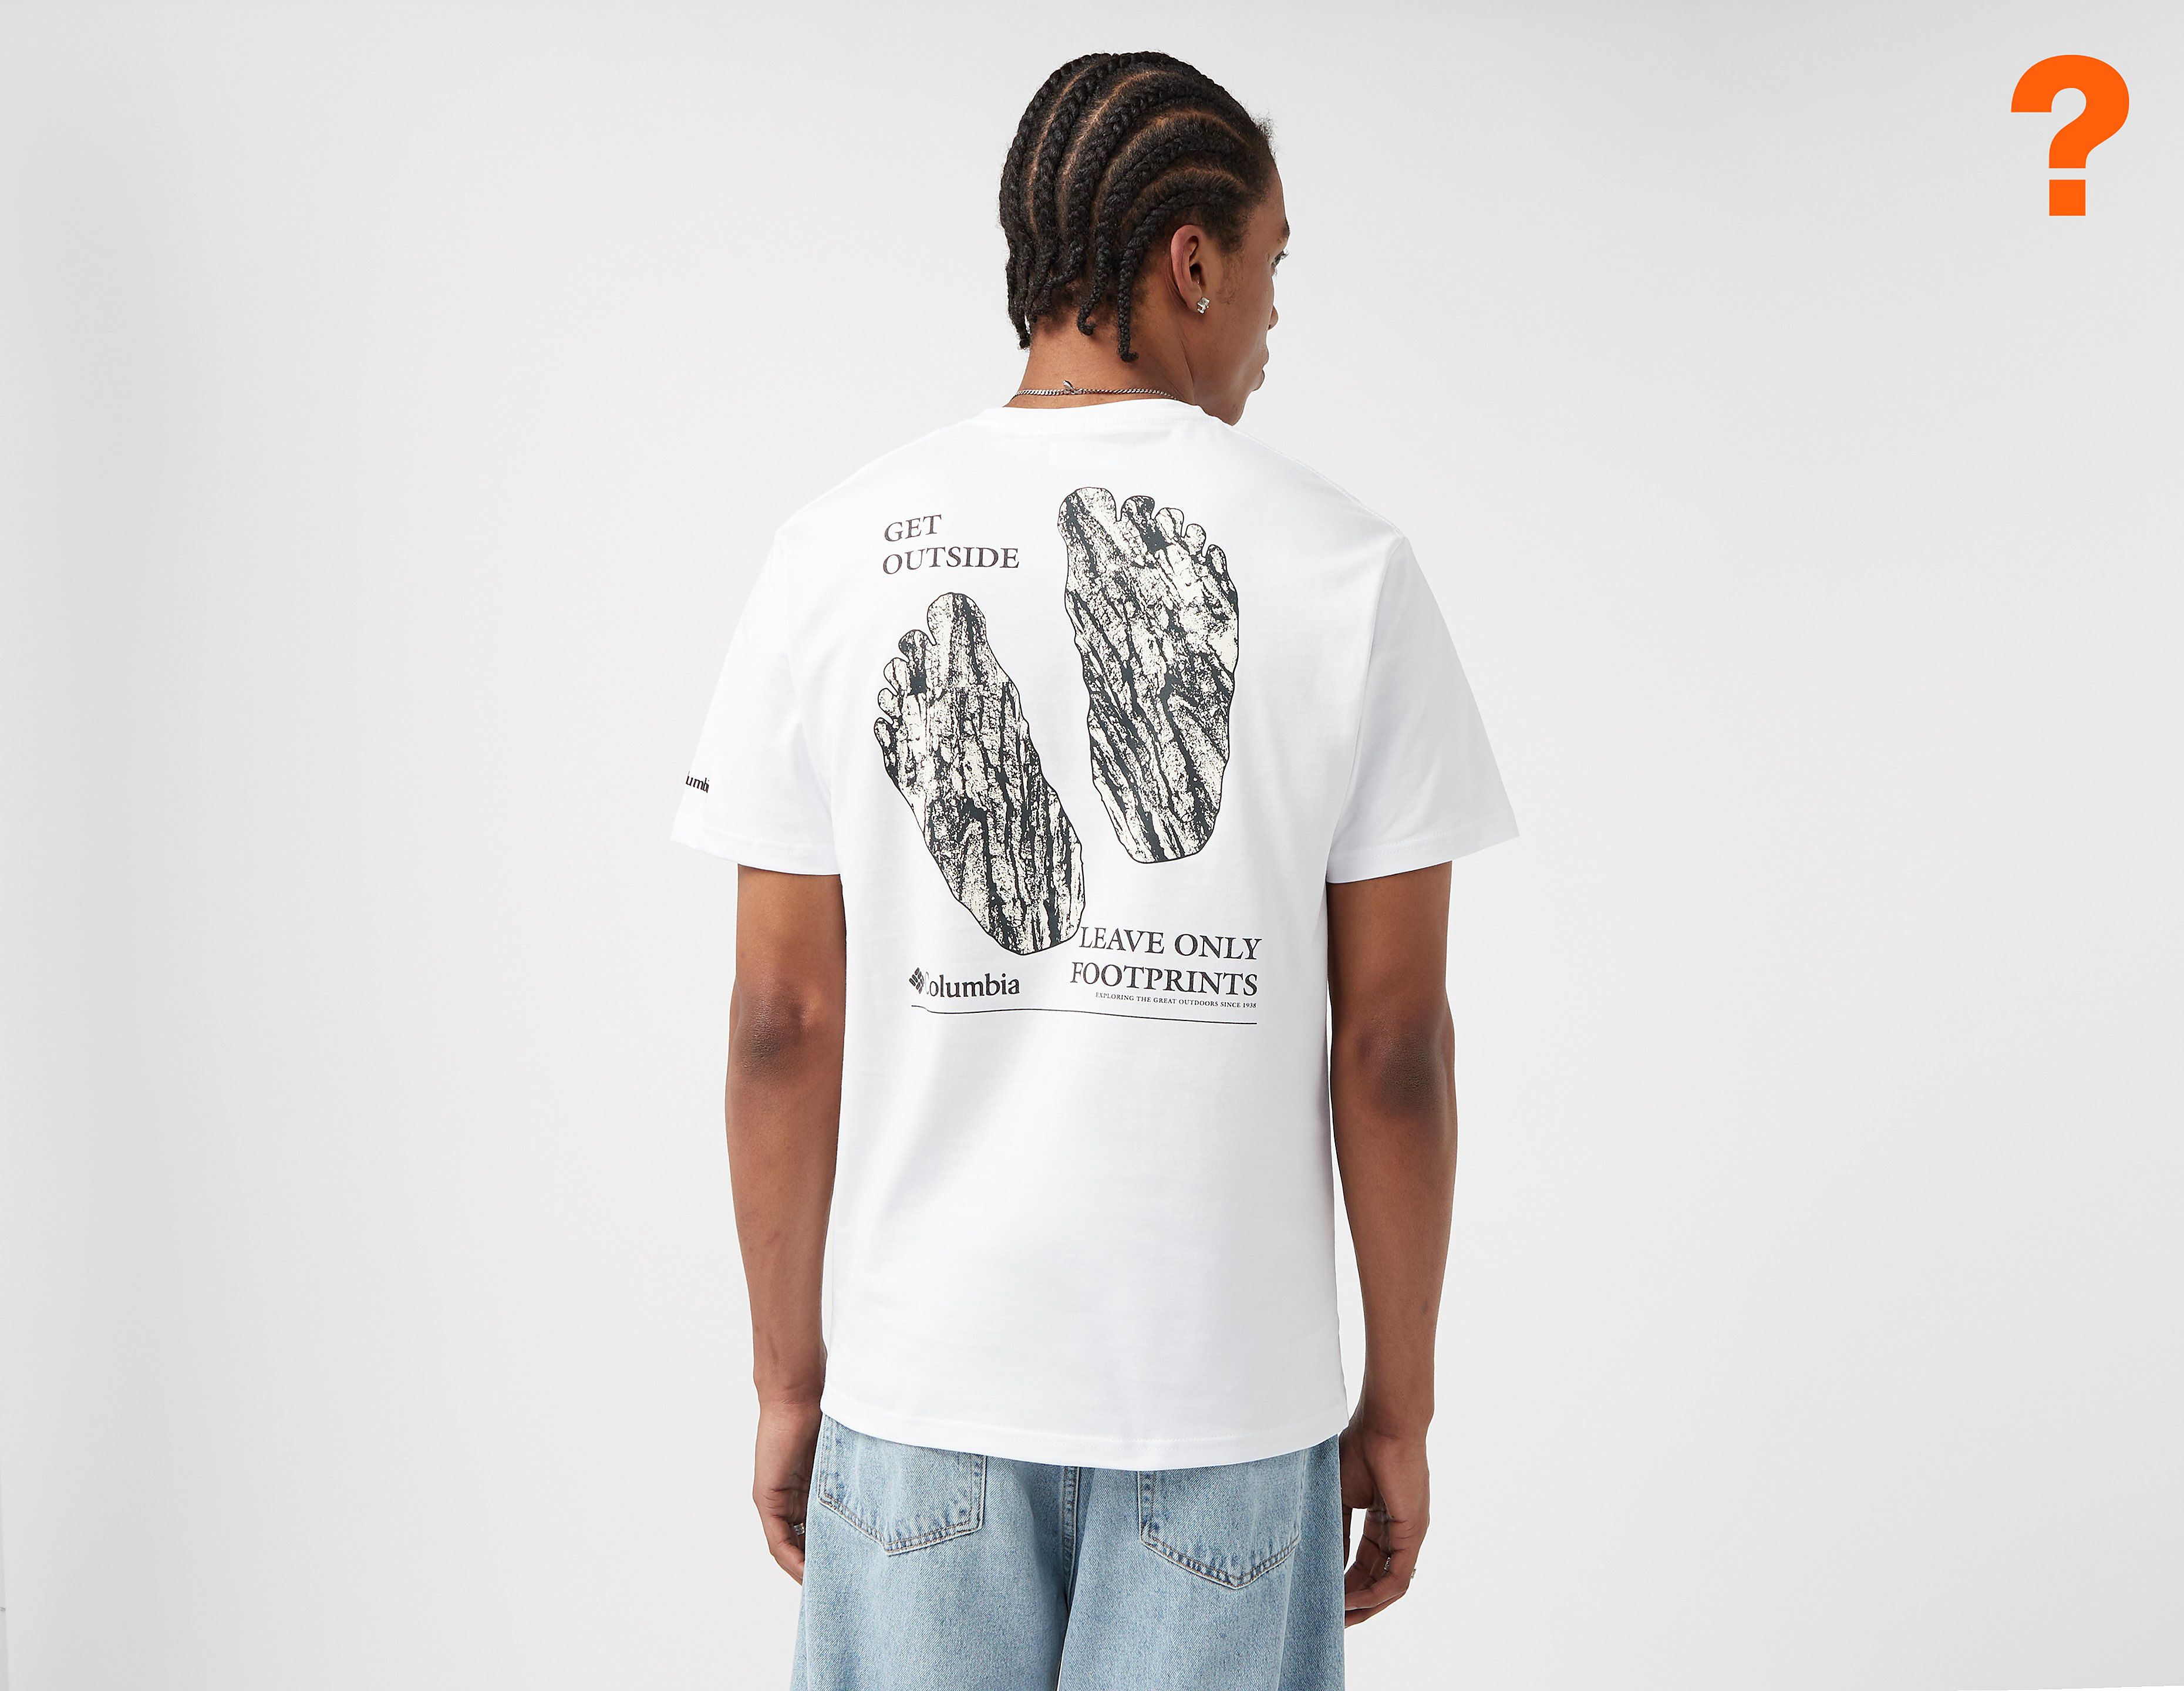 Columbia Footprints T-Shirt - size? exclusive, White